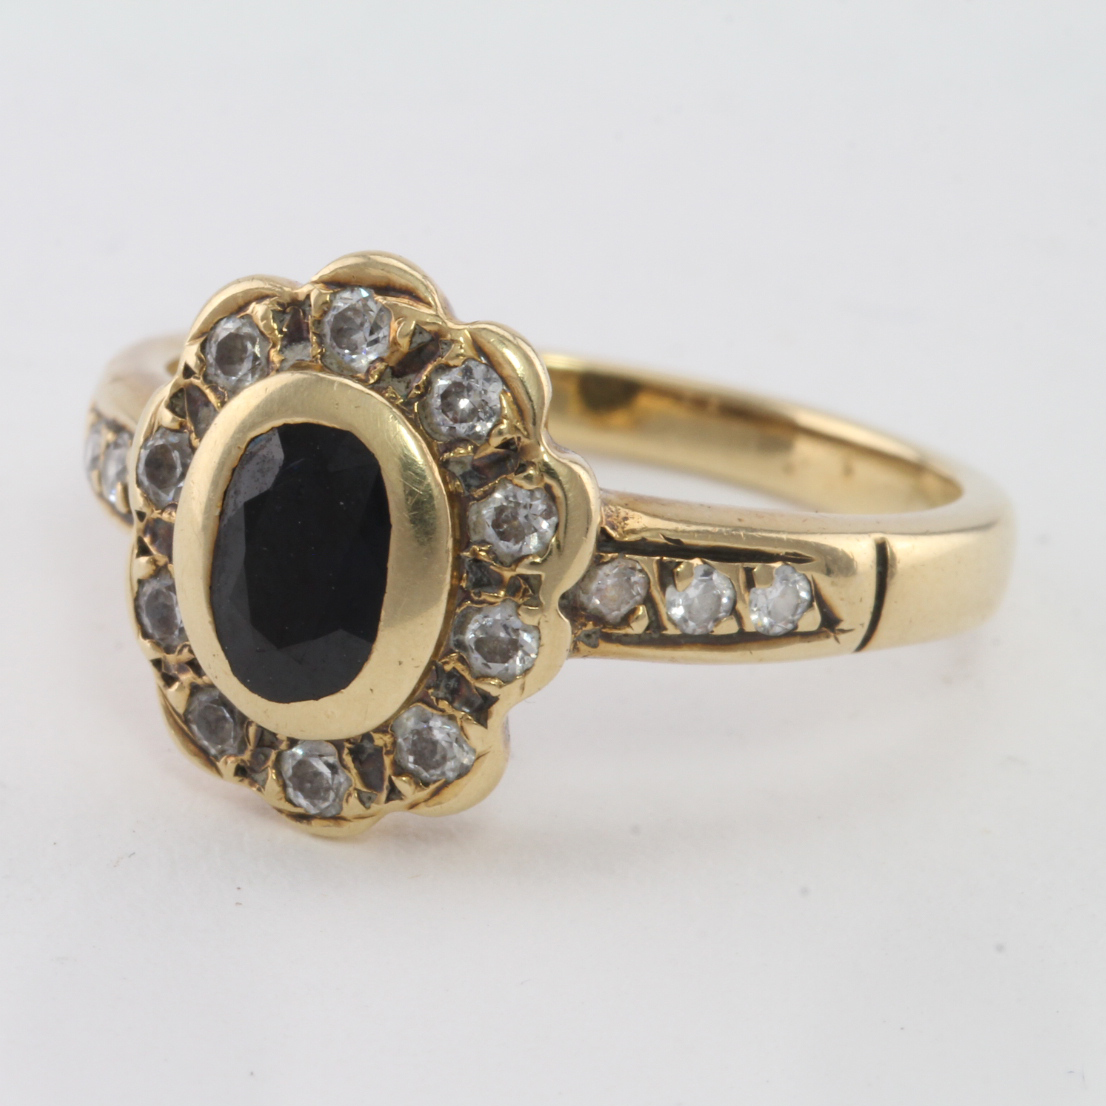 14ct Gold Ring set with Sapphire/CZ size M weight 4.5g